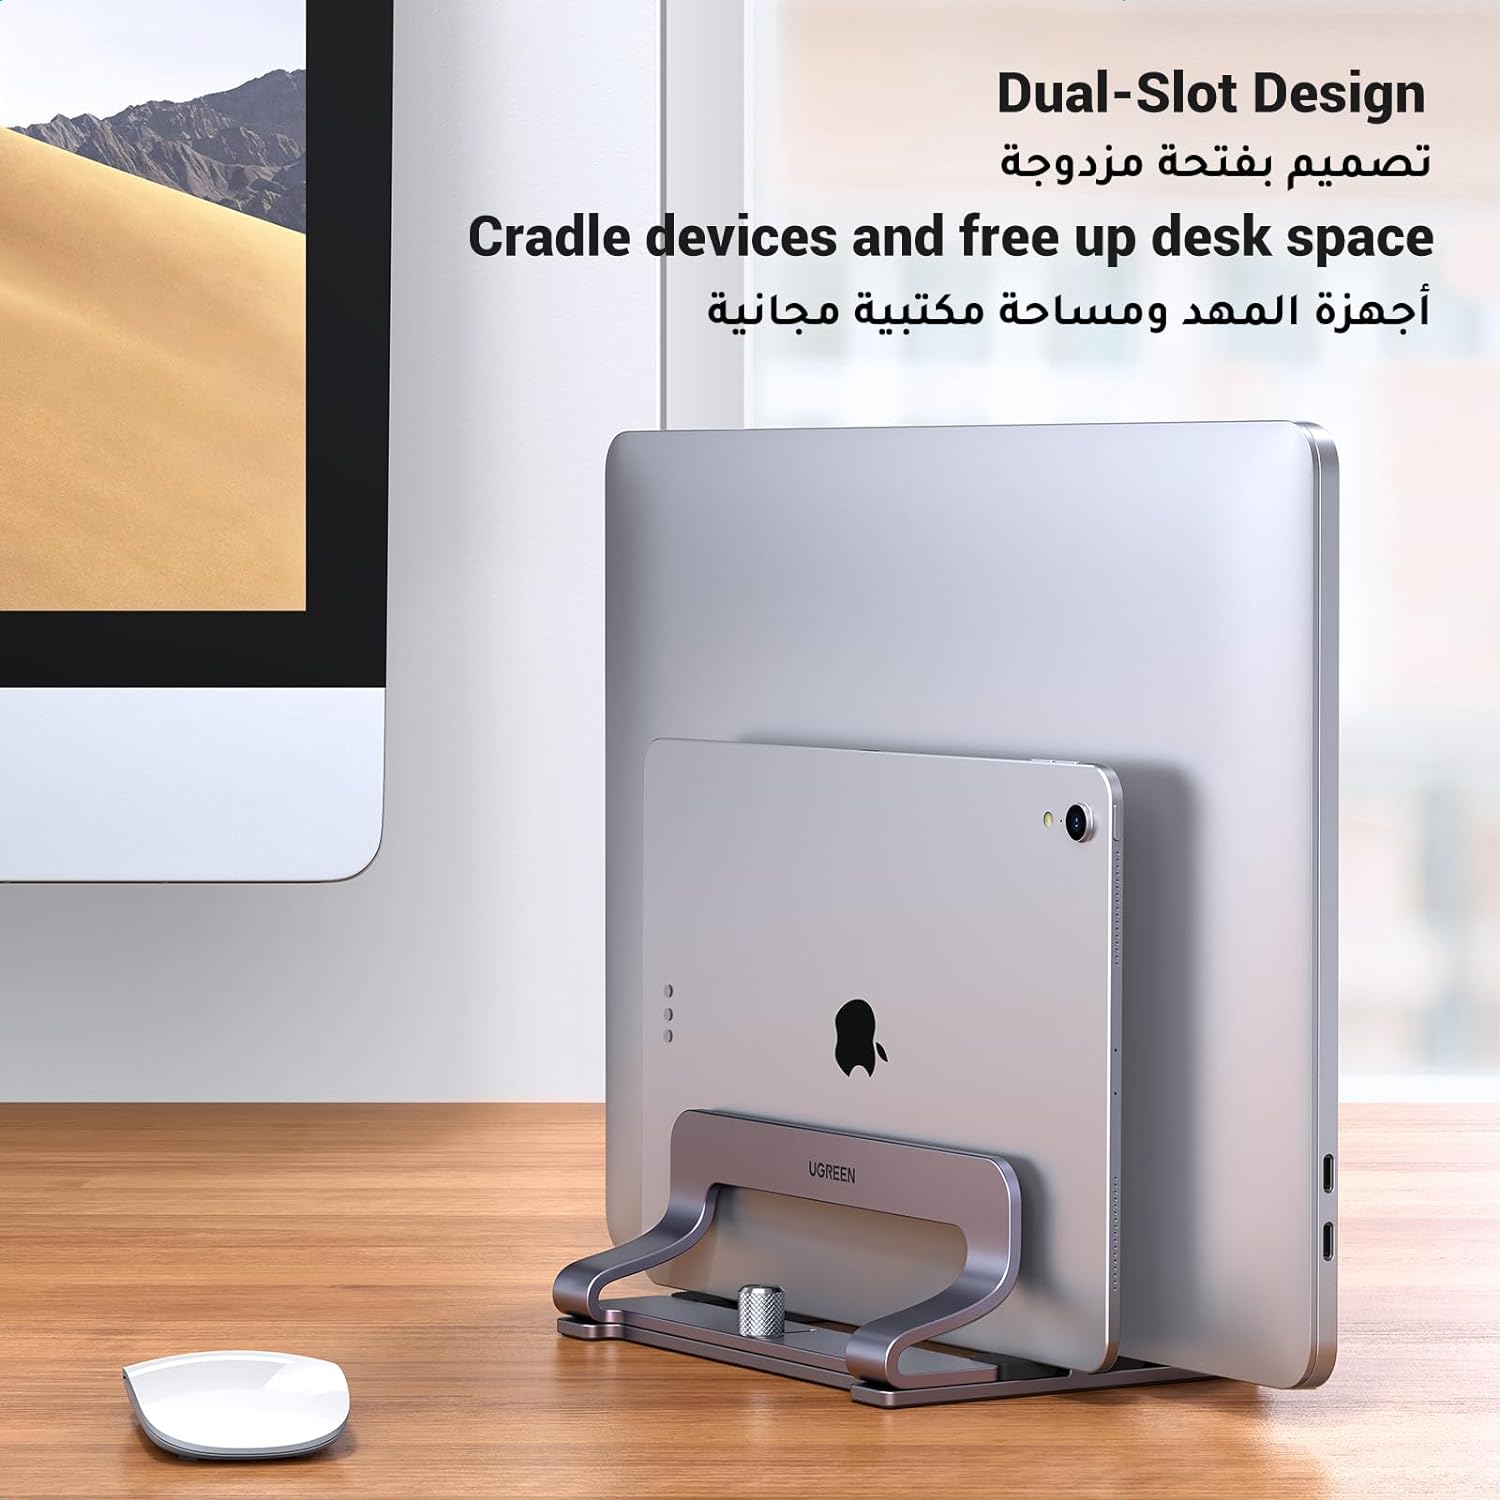 UGREEN Aluminum Vertical Laptop Stand, Double Desktop Stand Holder with Adjustable Dock Space-Saving Anti Slide Silicone Grips for All Tablet/iPad MacBook/Surface/Samsung/HP/Dell/Chrome Book Sliver